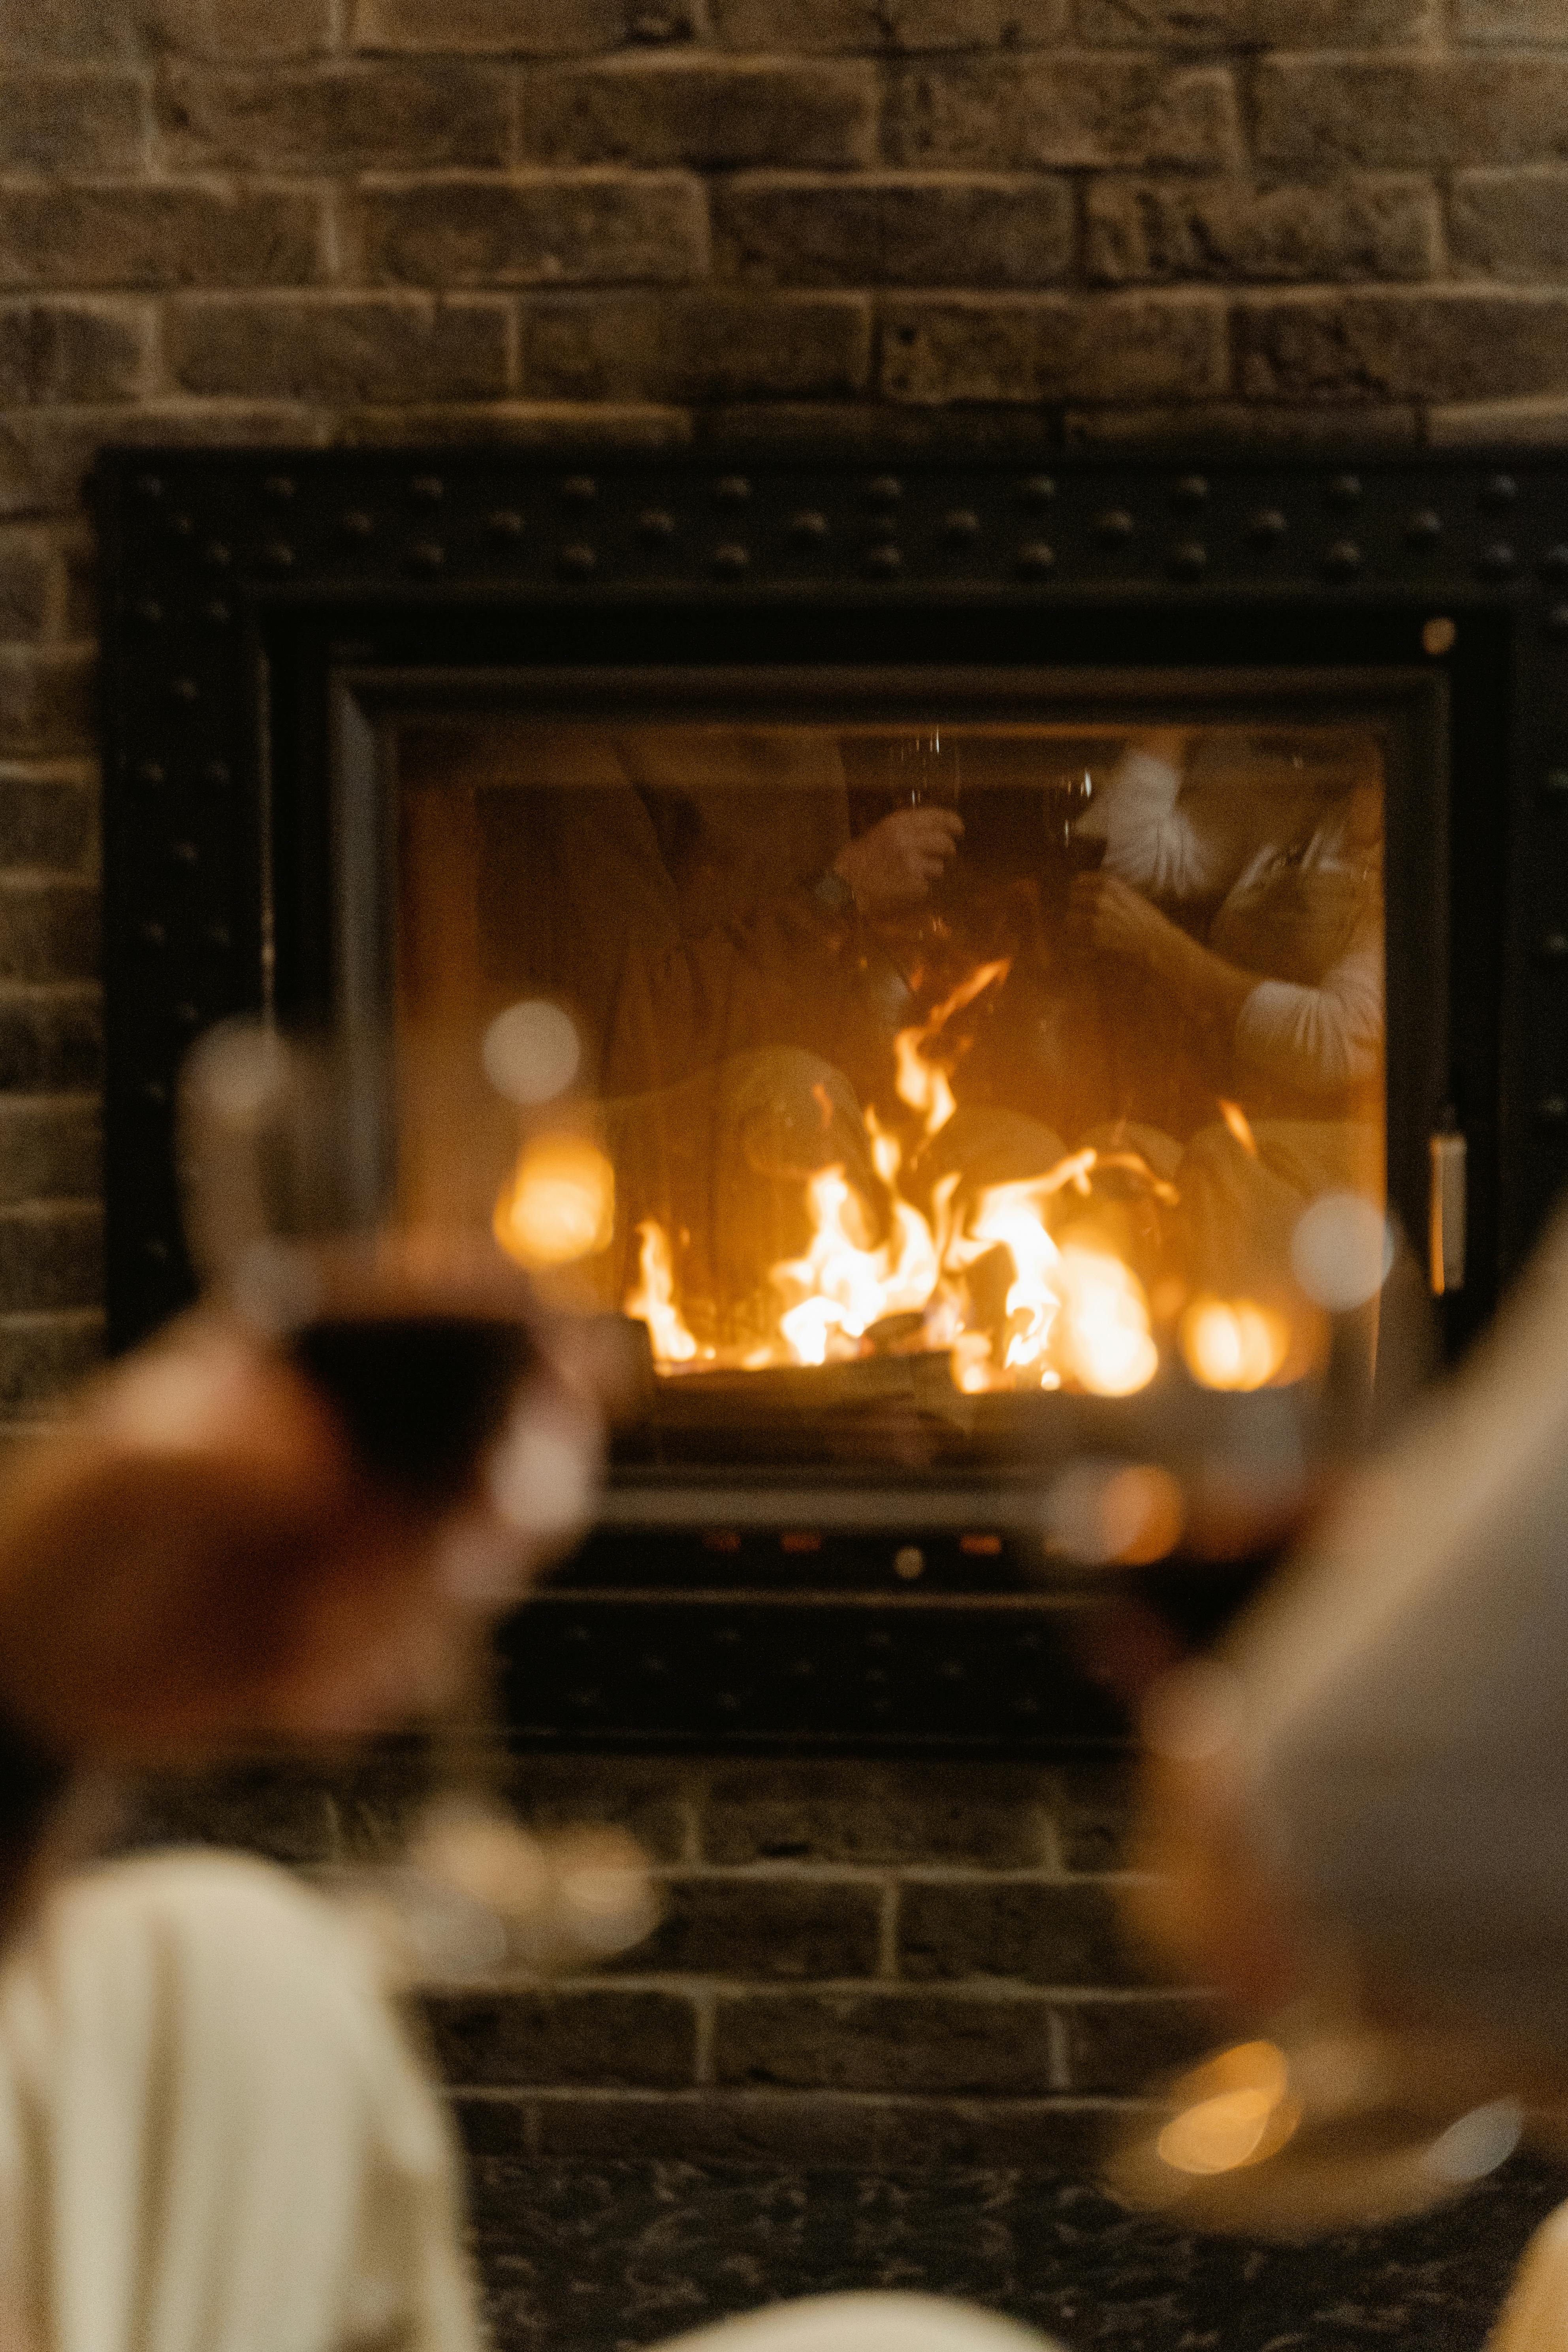 Fire burning in a fireplace | Source: Pexels